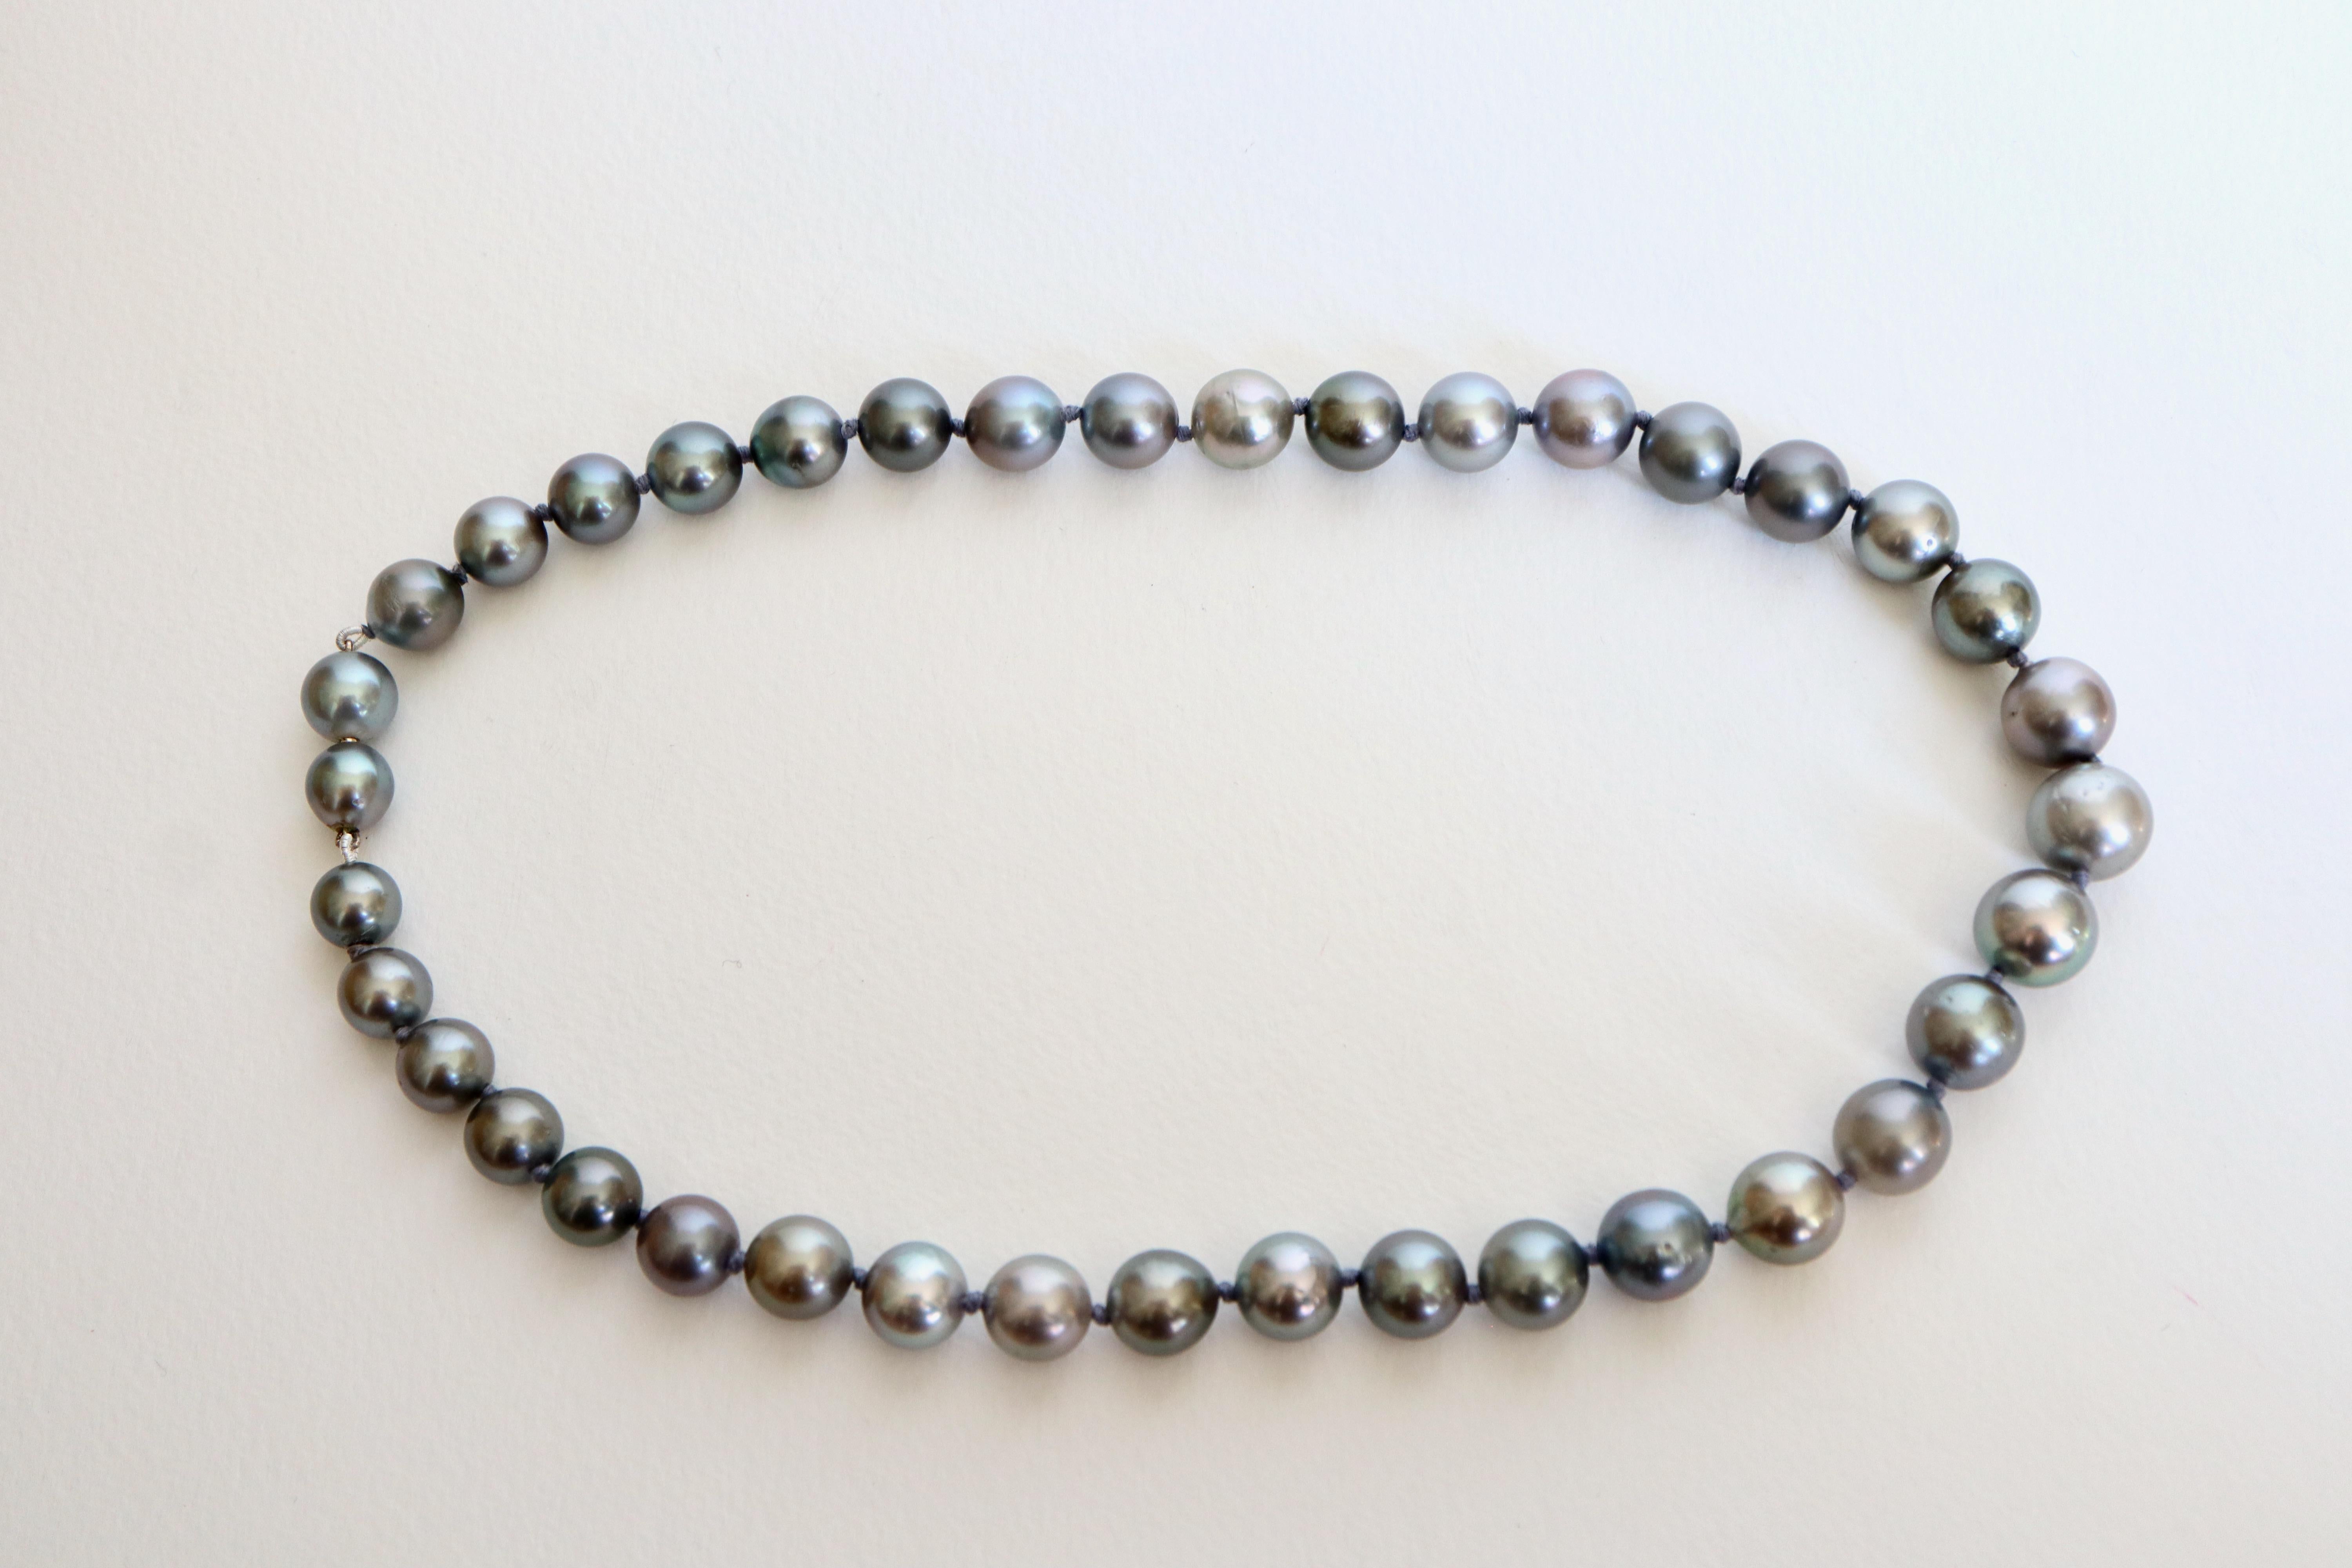 Necklace of Cultured Grey Pearls 9 mm to 13 mm For Sale 1